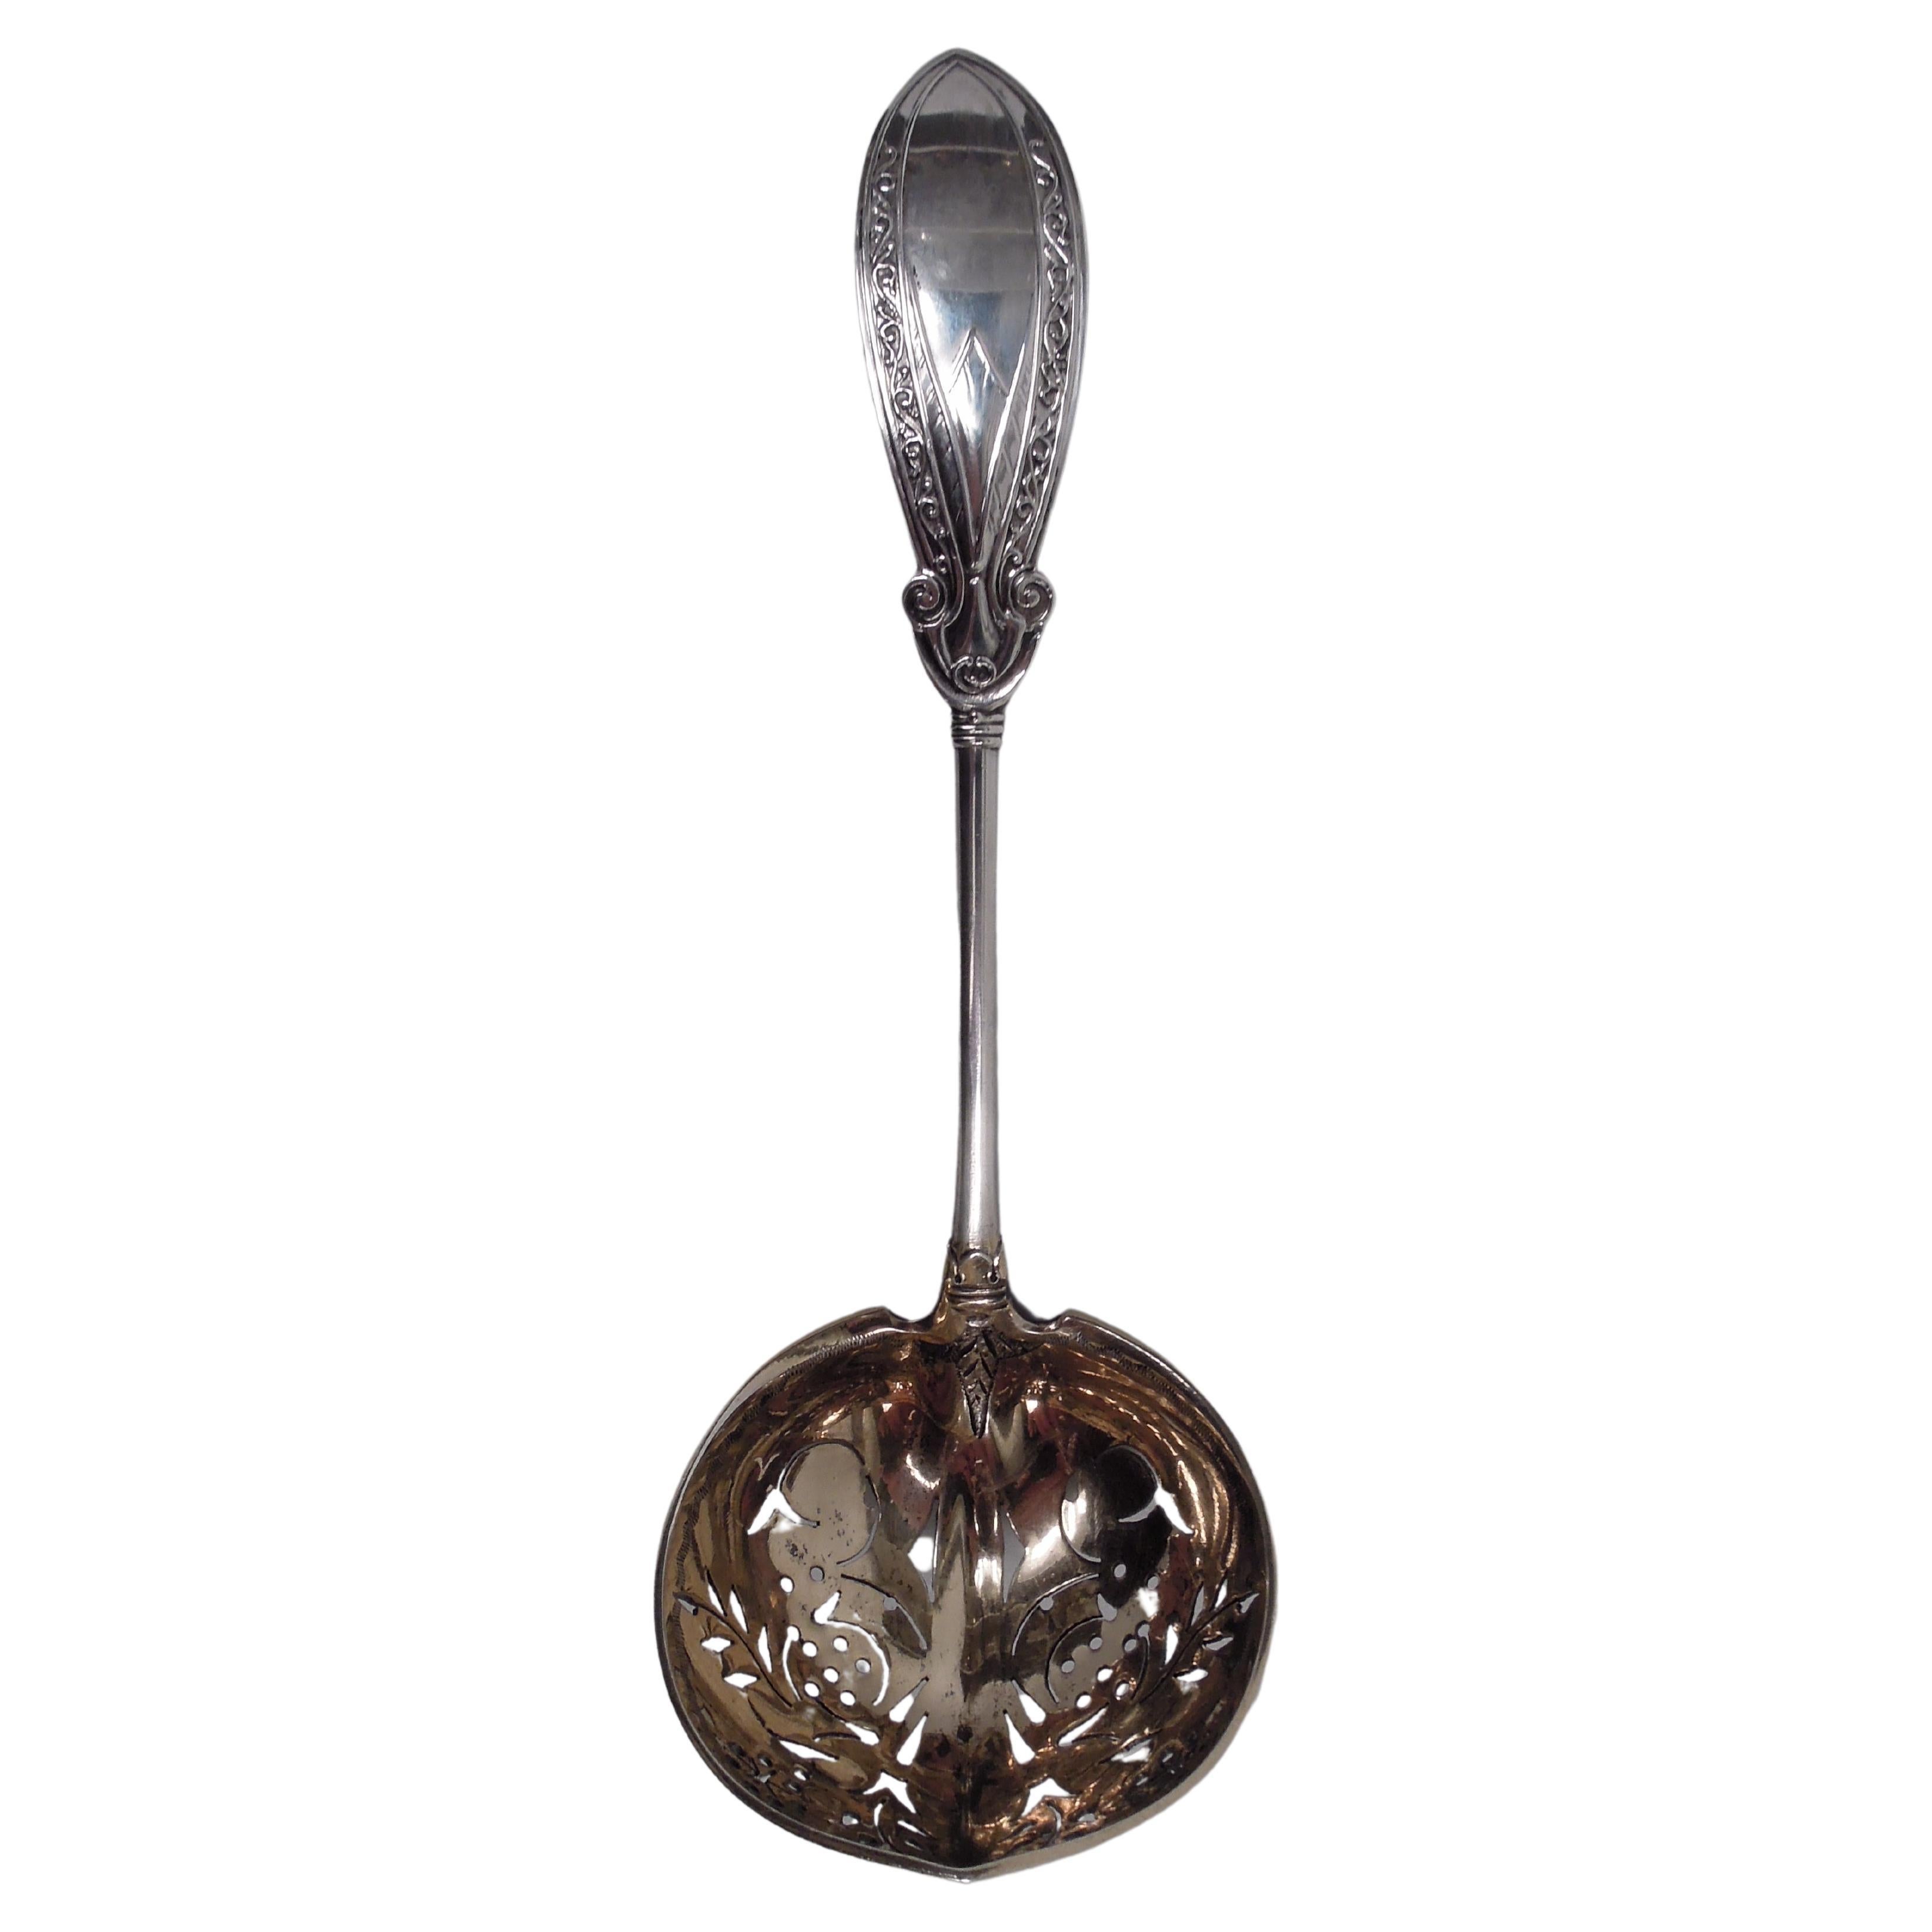 Antique Gorham Persian Aesthetic Sterling Silver Pierced Ladle For Sale